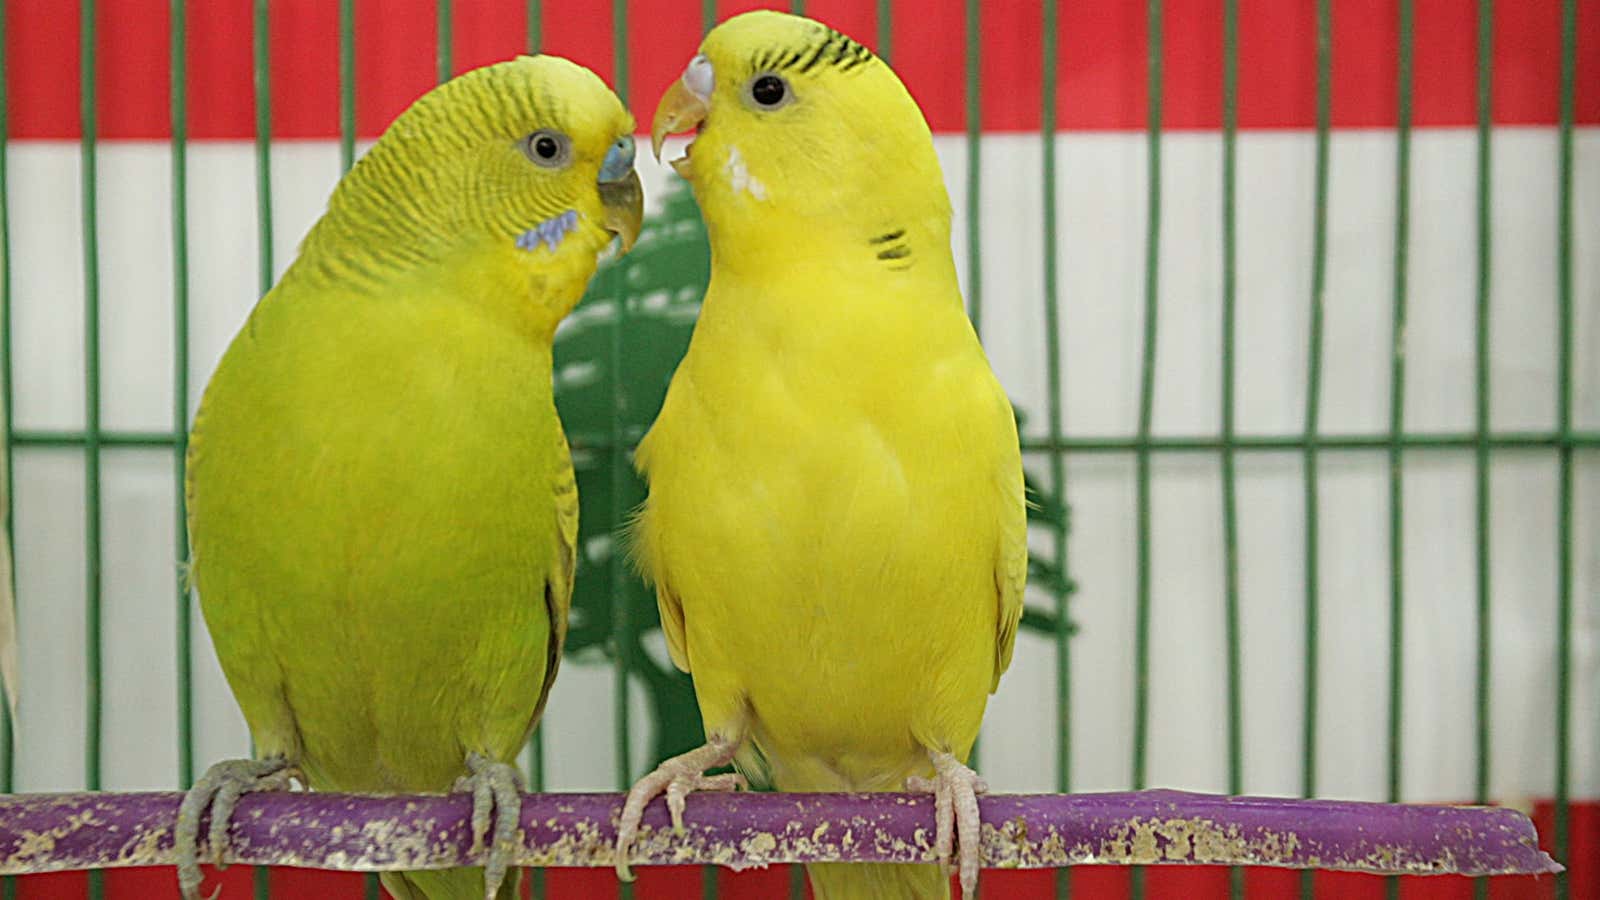 We could all learn a thing or two from female parakeets.